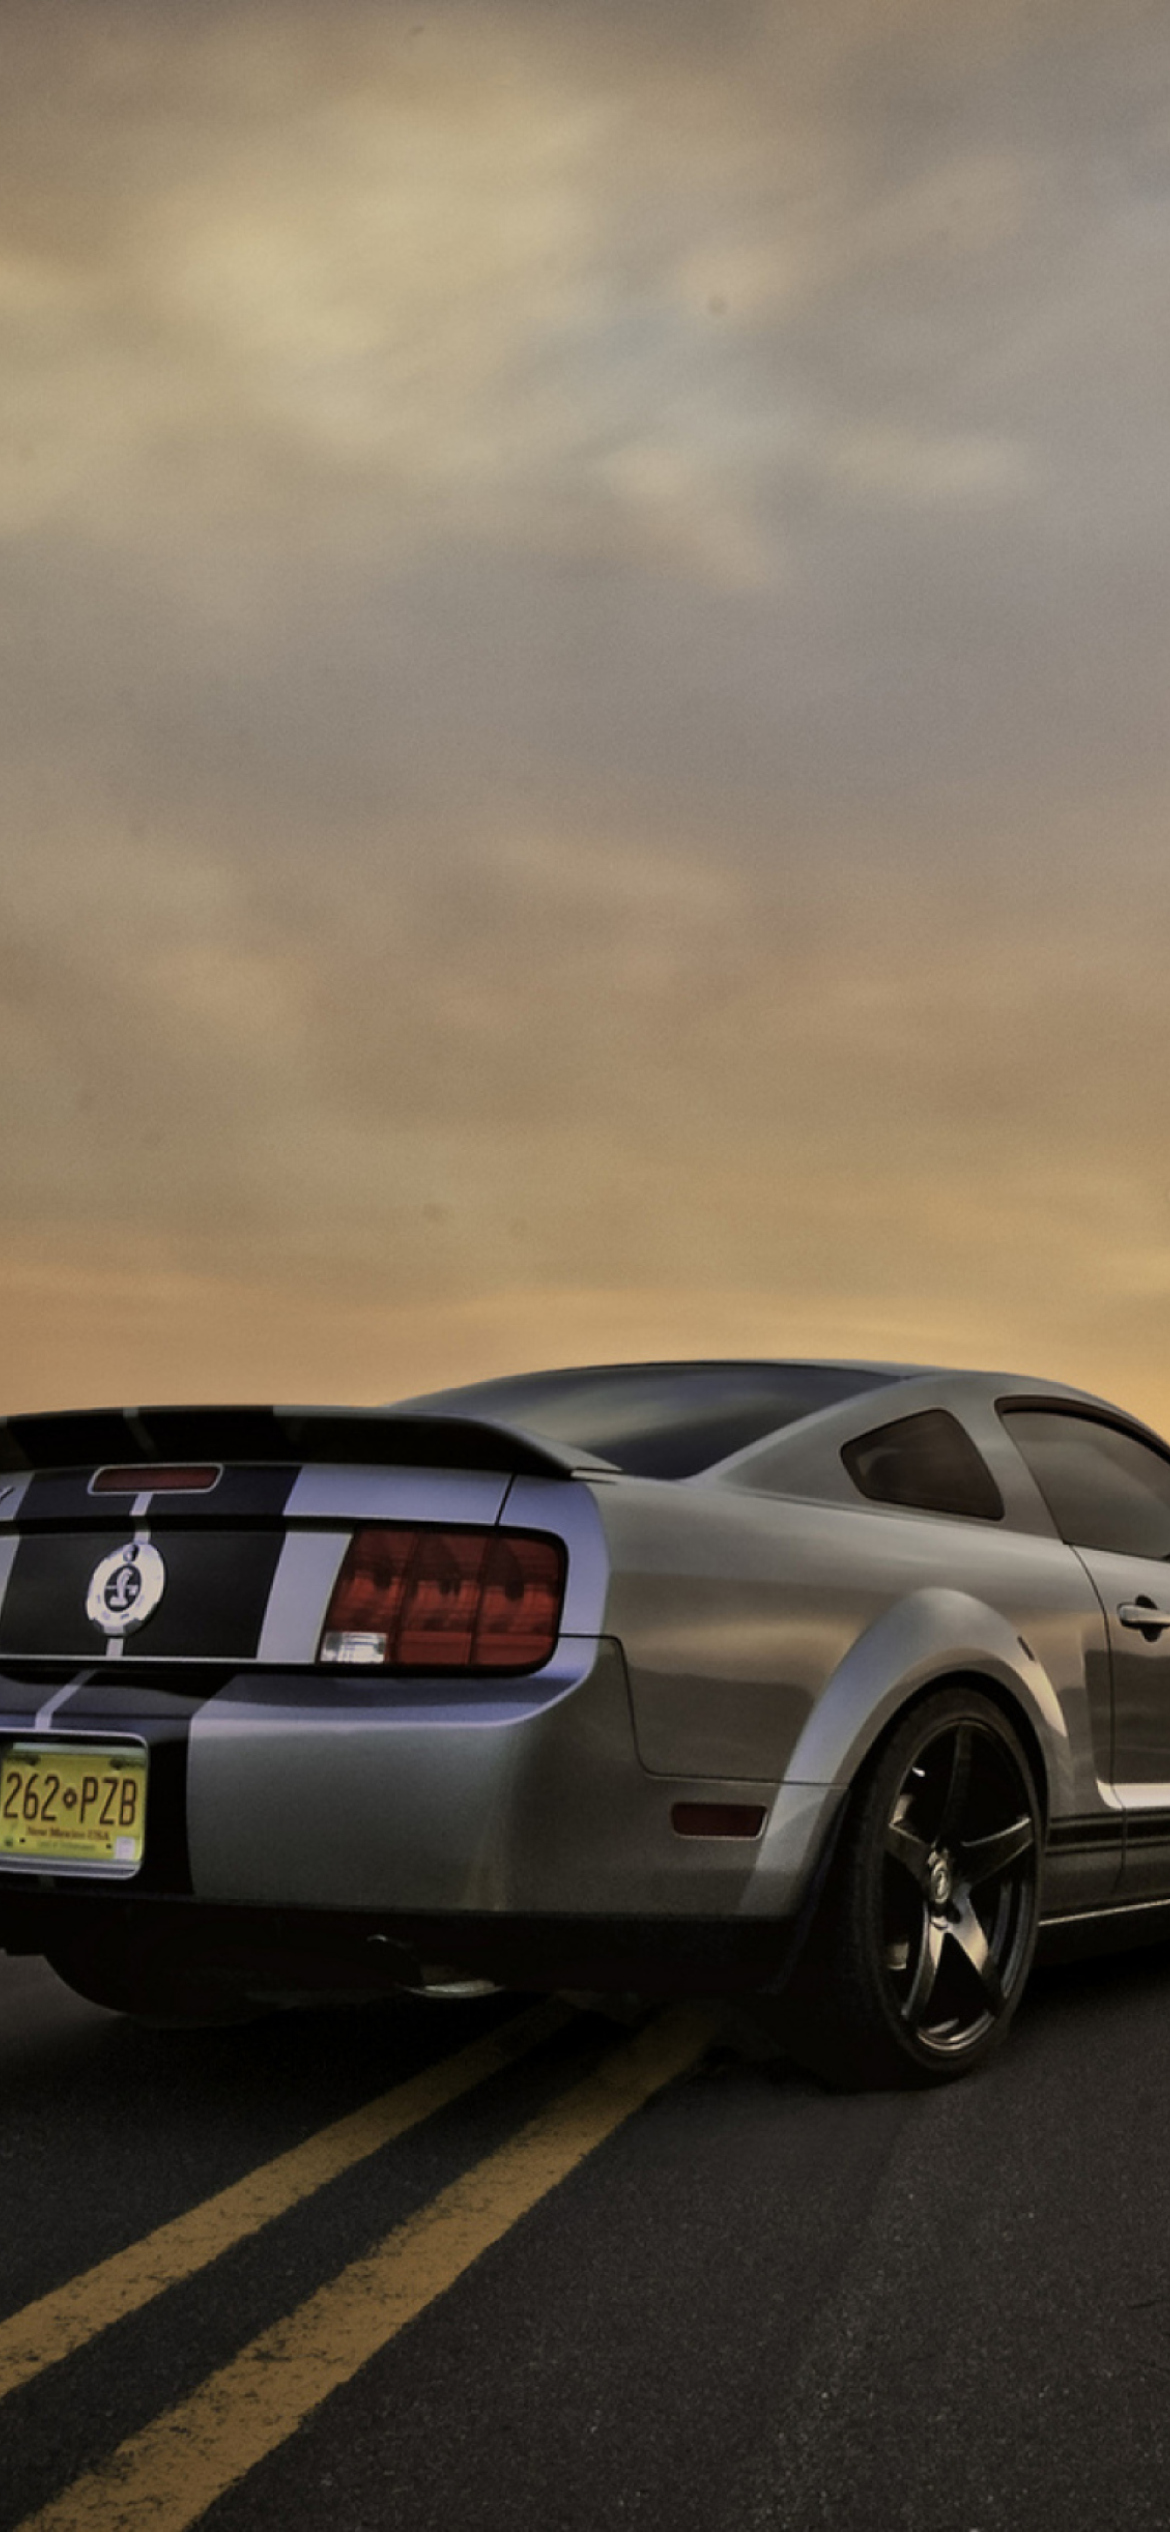 Das Ford Mustang Shelby GT500 Wallpaper 1170x2532